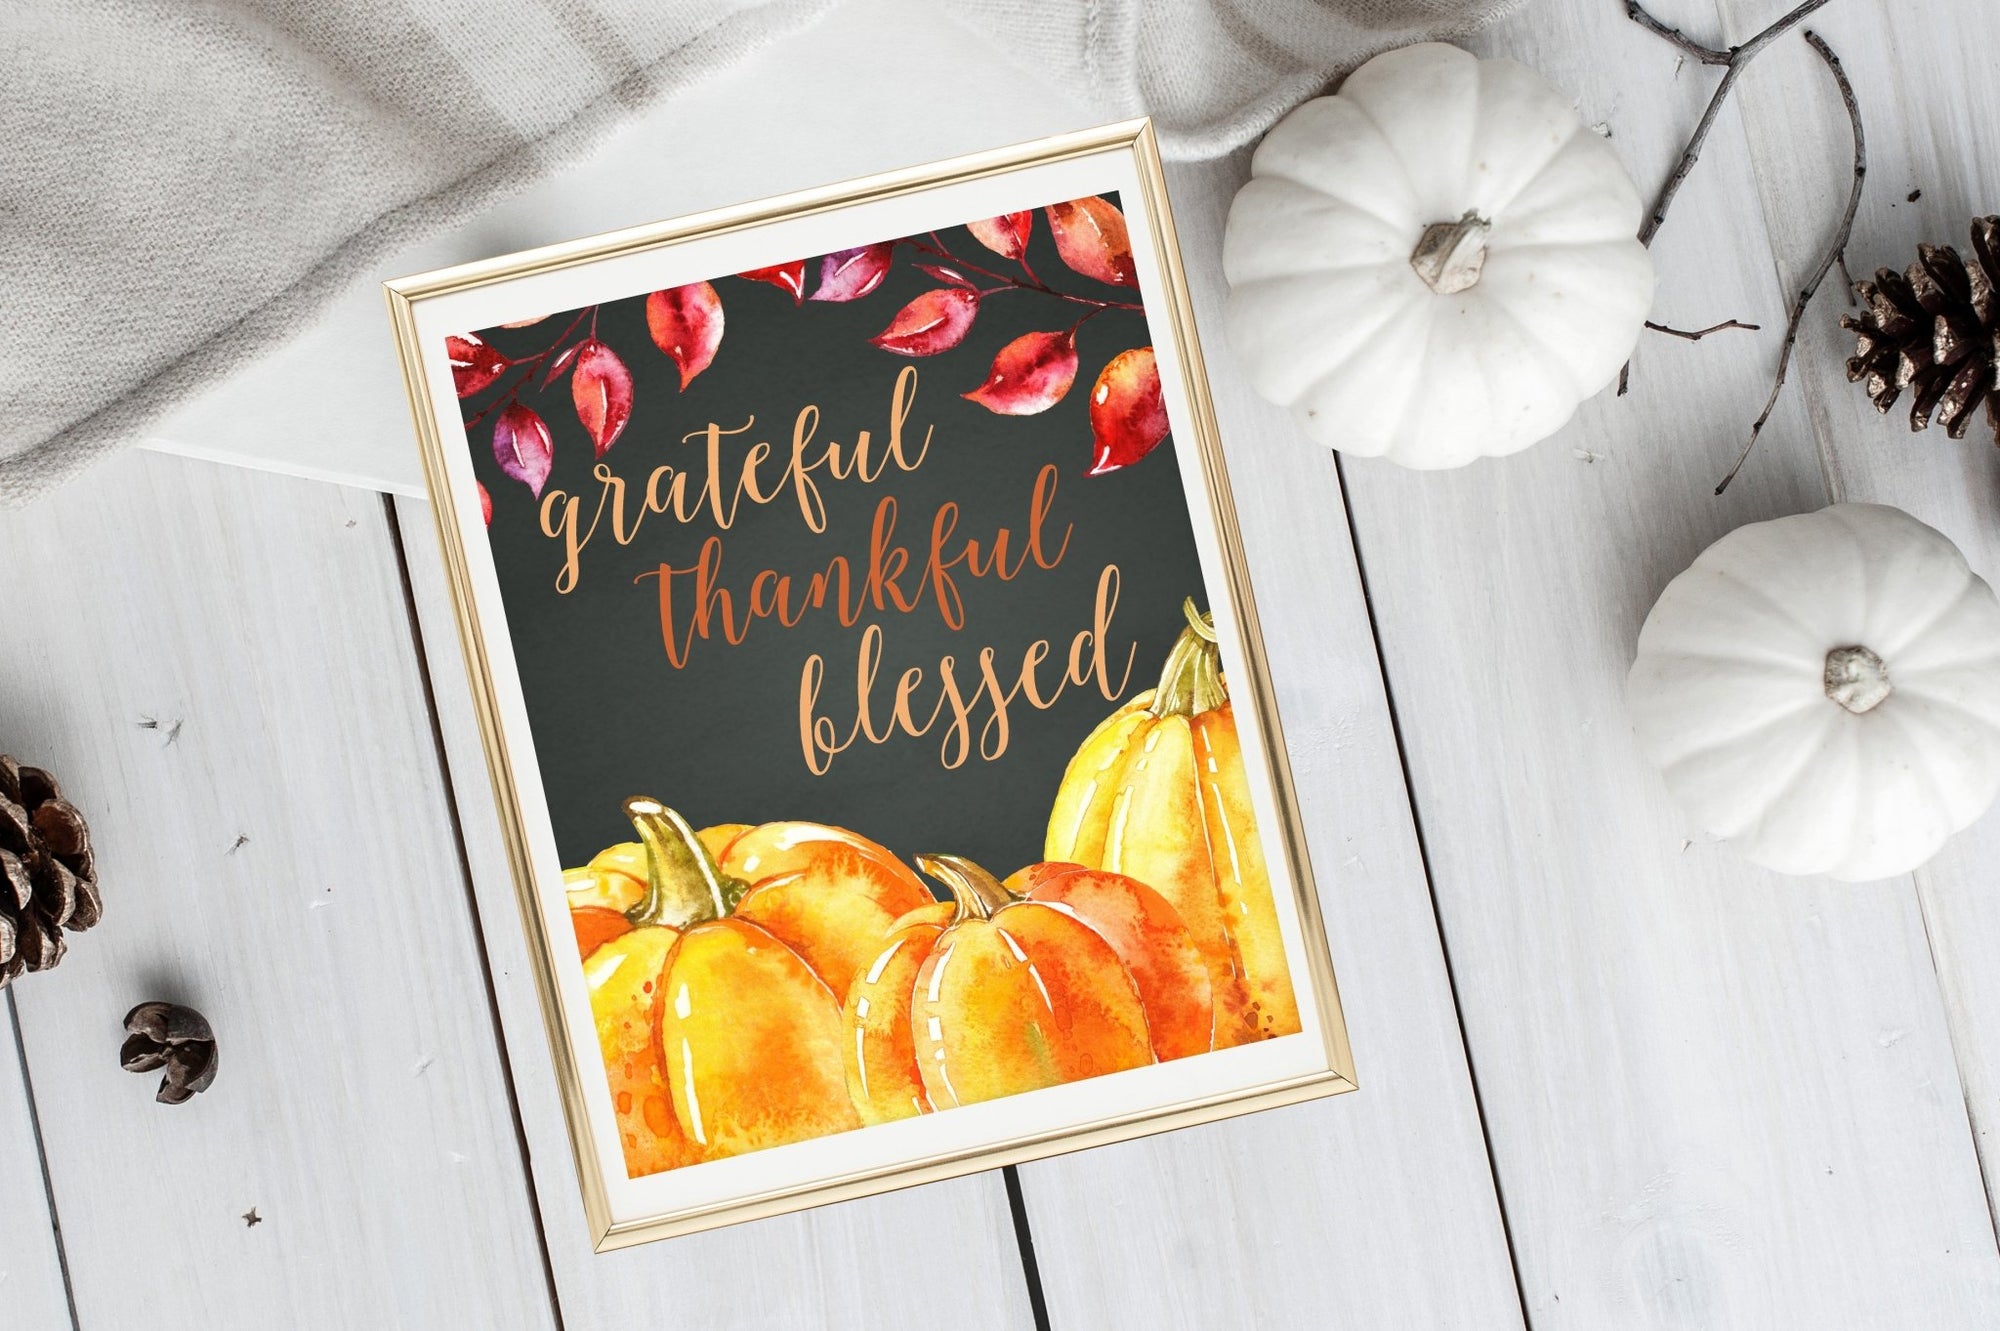 Grateful Thankful Blessed Printable - Pretty Collected